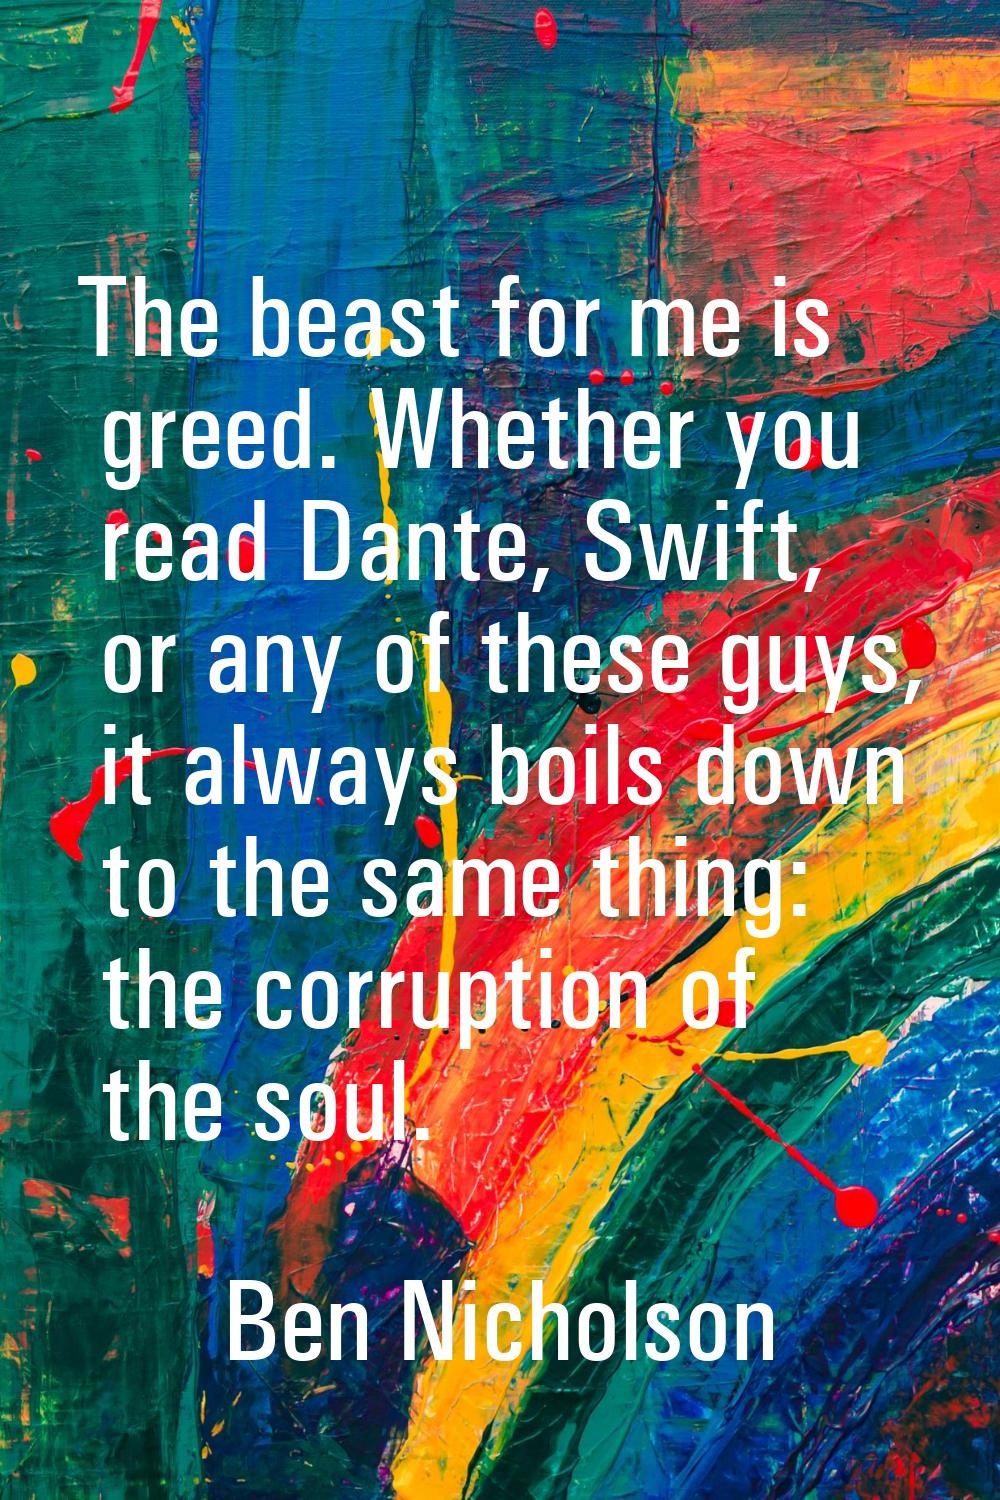 The beast for me is greed. Whether you read Dante, Swift, or any of these guys, it always boils dow